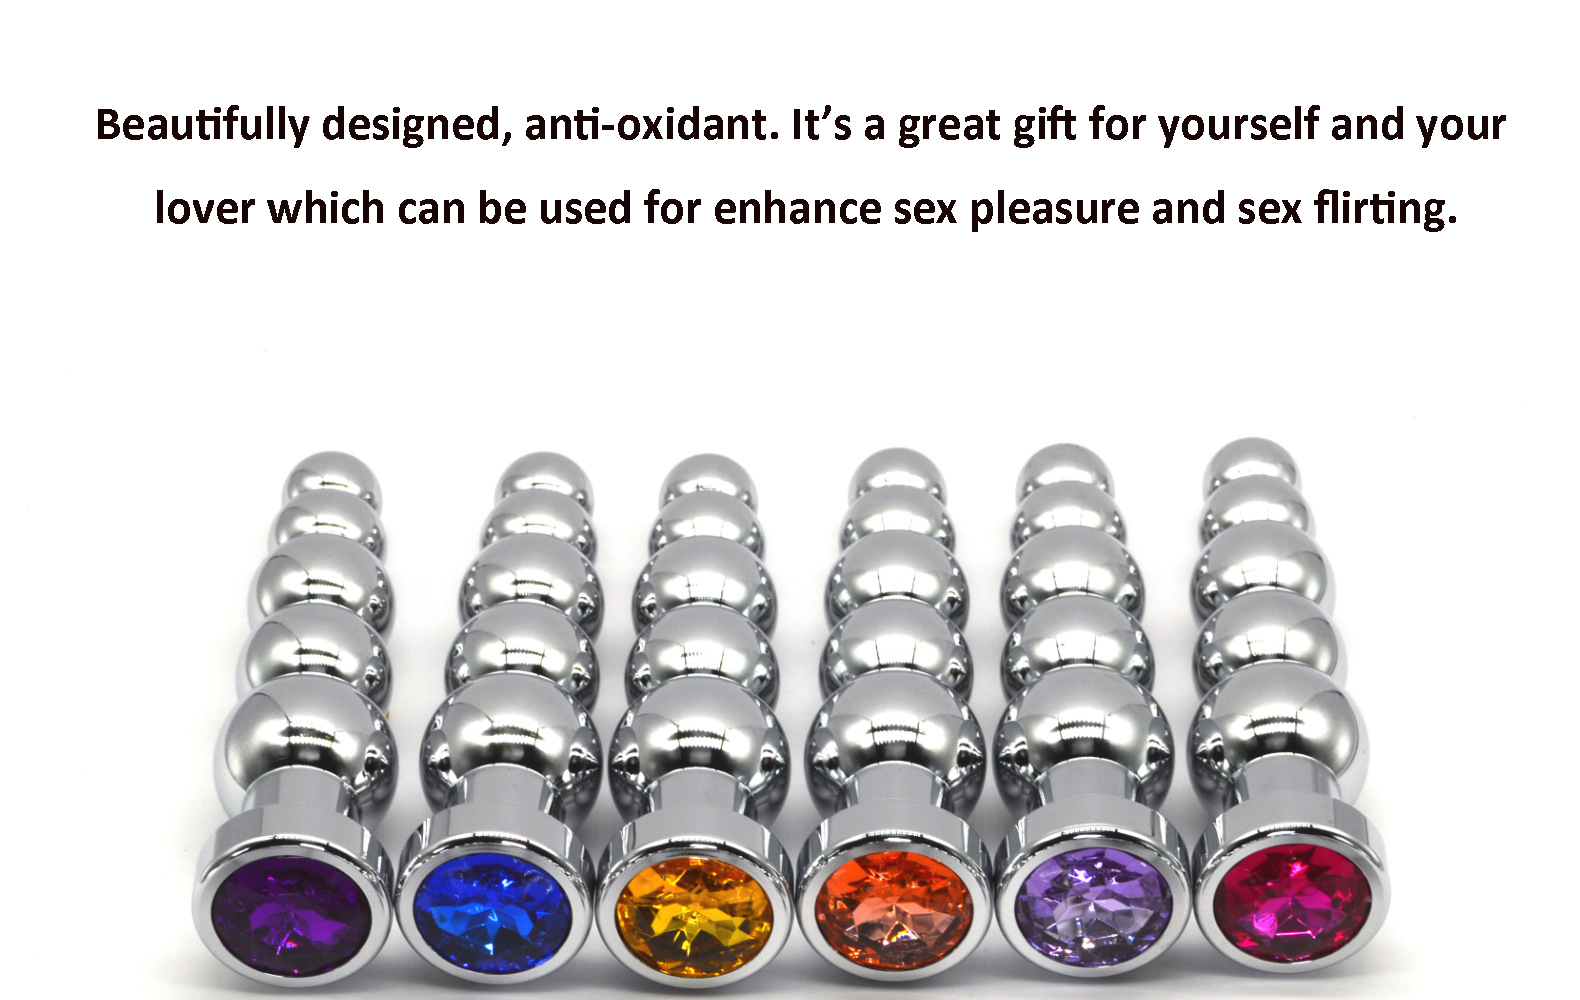 Anal Beads, Colourful Jewelry Metal Butt Plug Anal Trainer Toys with 5 Graduated Balls Fetish Kinky Sex Love Tools for Couple Lover (1)